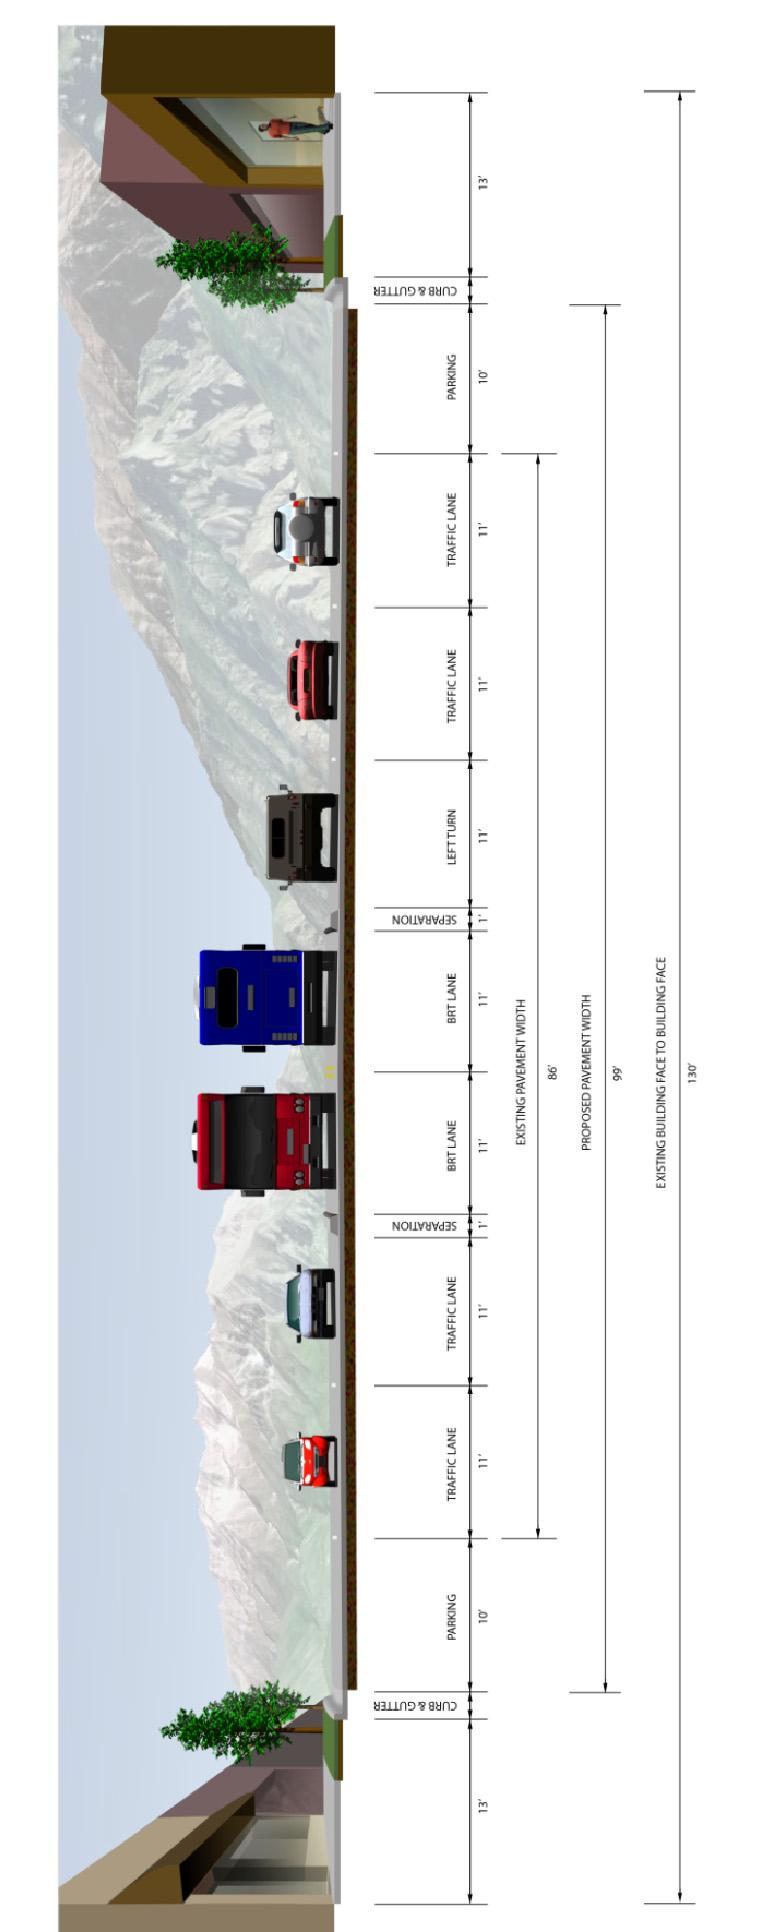 Figure 2-9: University Avenue Cross-Section: 700 North to 500 South* *0-foot parallel parking